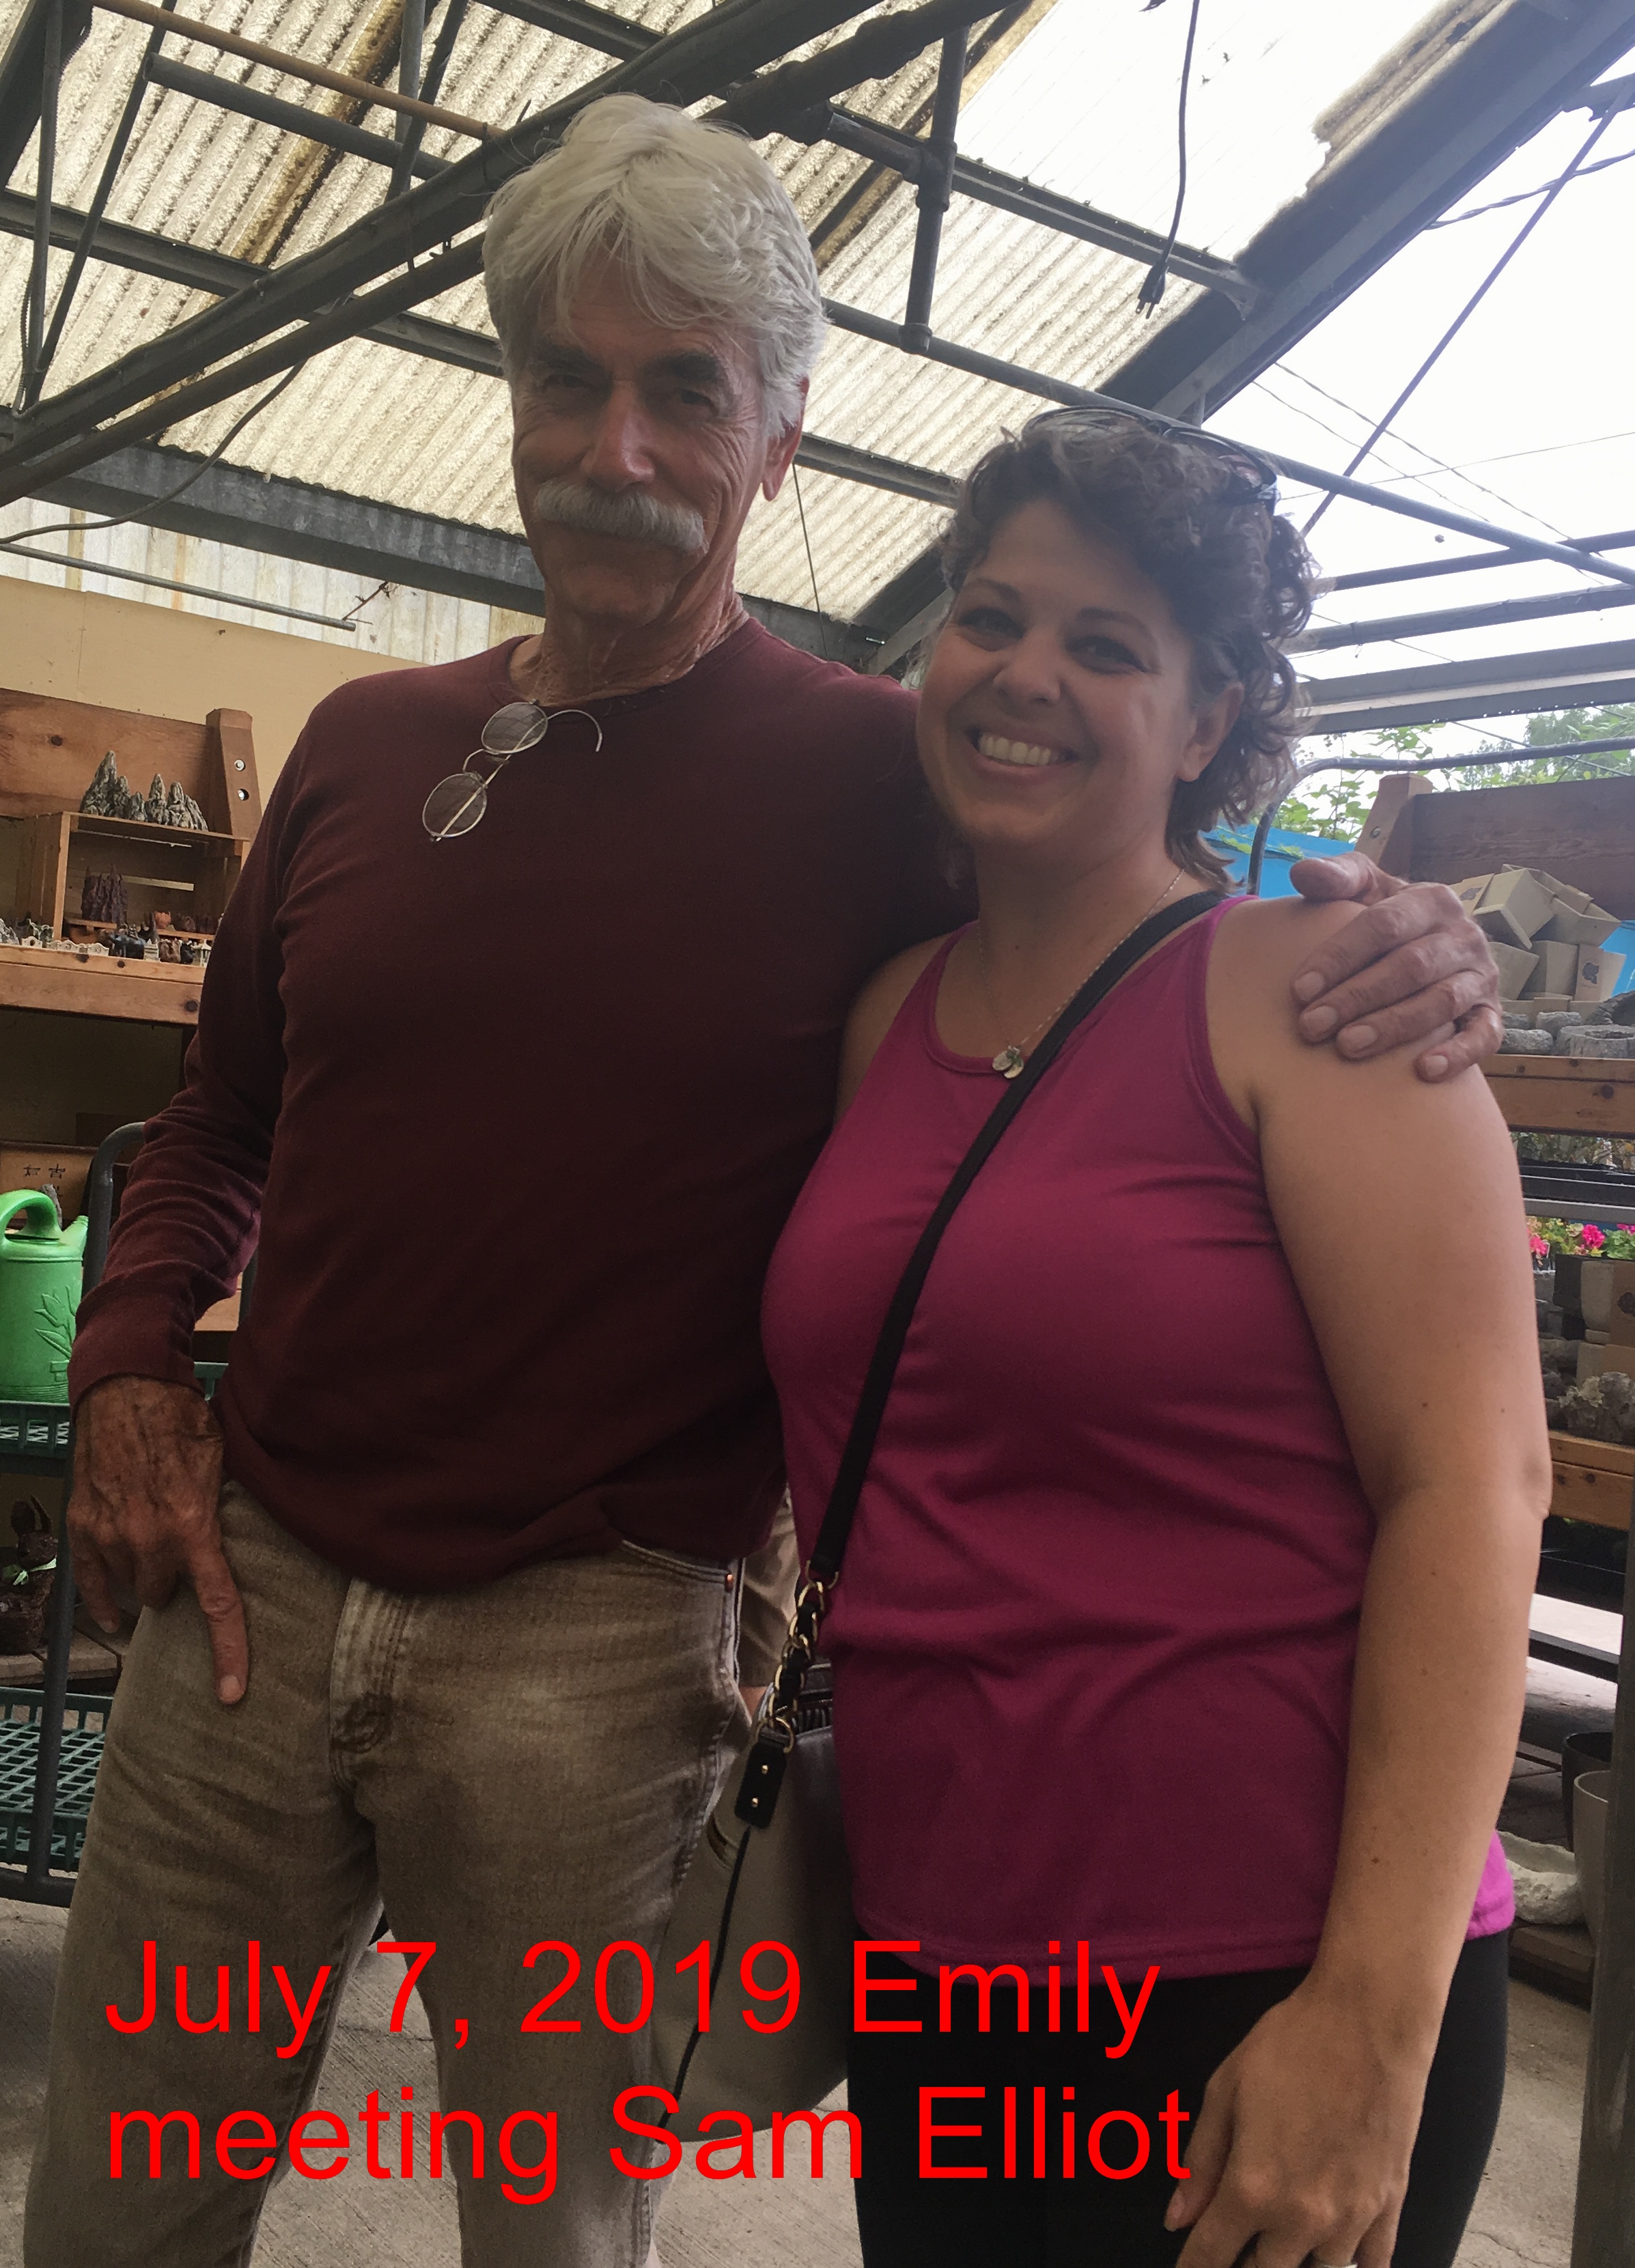 July 7, 2019 Emily and Sam Elliot the actor